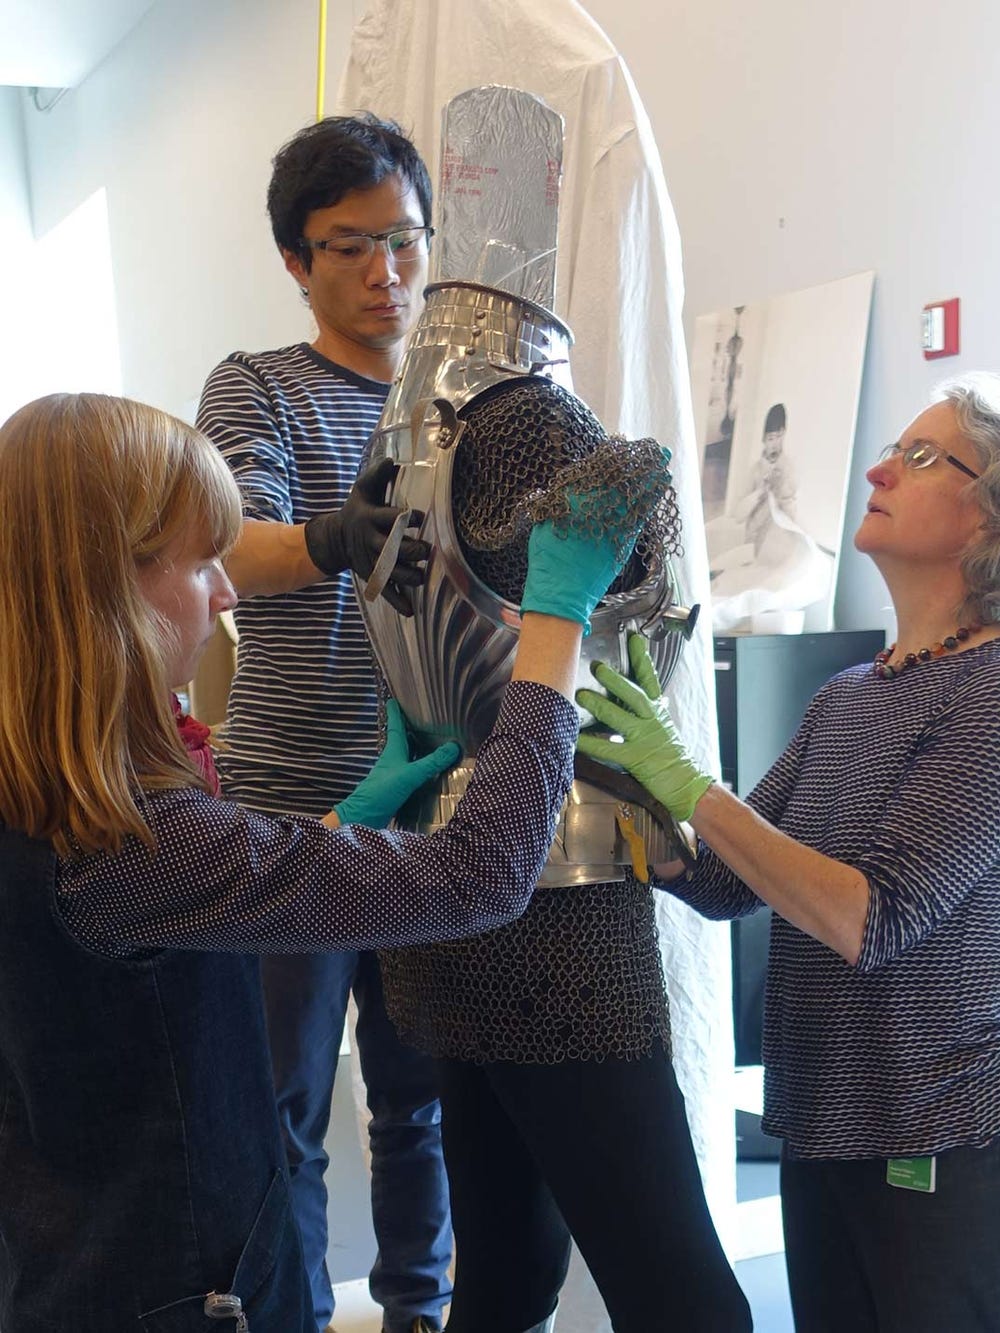 Objects conservators Colleen O’Shea and Jane Williams and mountmaker Mike Lai check the fit of the armor on its modified support and how well new mounts are supported.